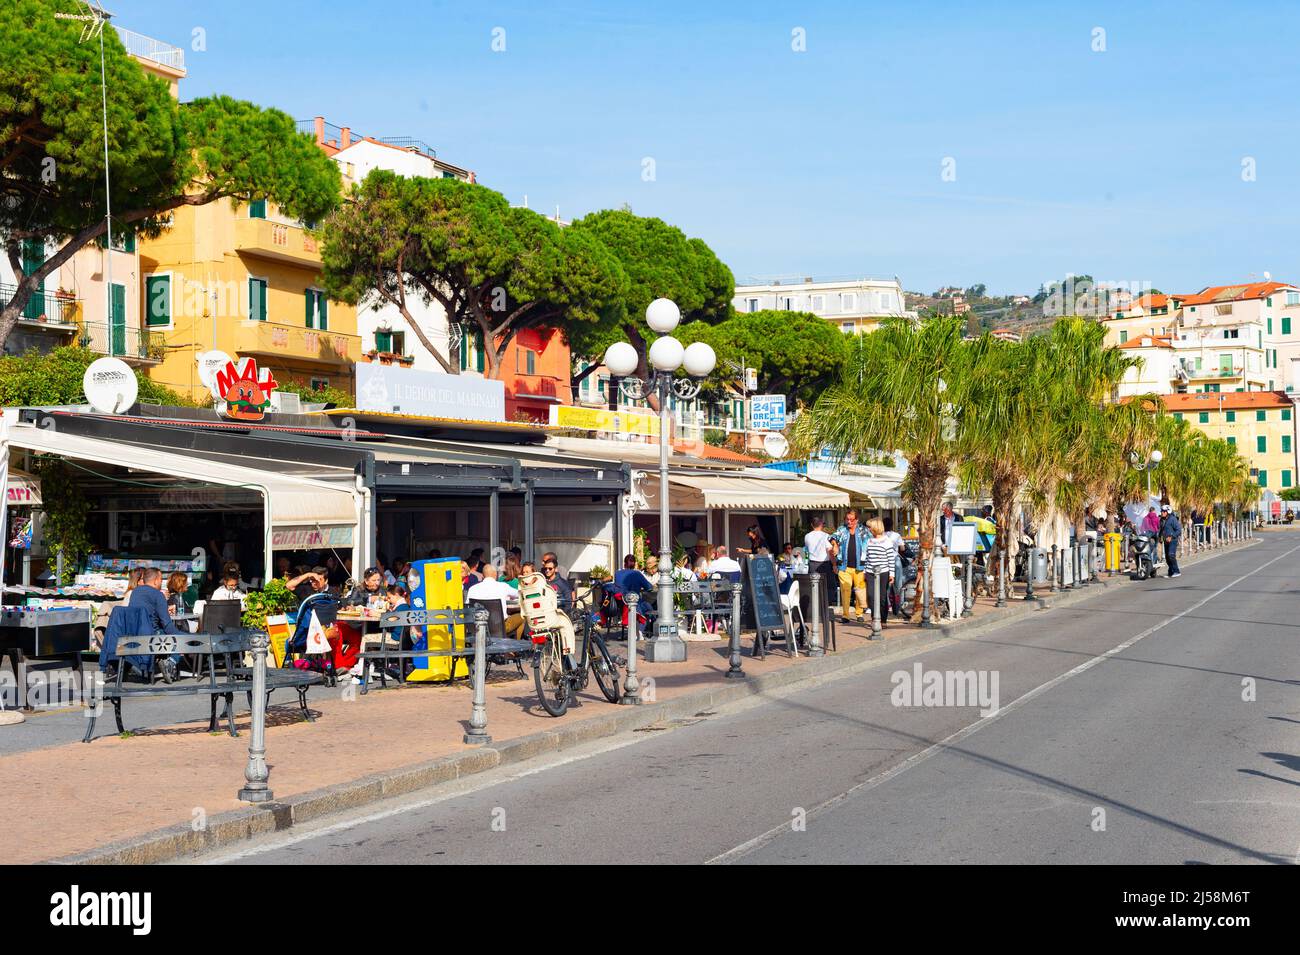 SANREMO, ITALY - OCTOBER 28, 2021: People sitting in sidewalk restaurant by road in bright sunlight Stock Photo